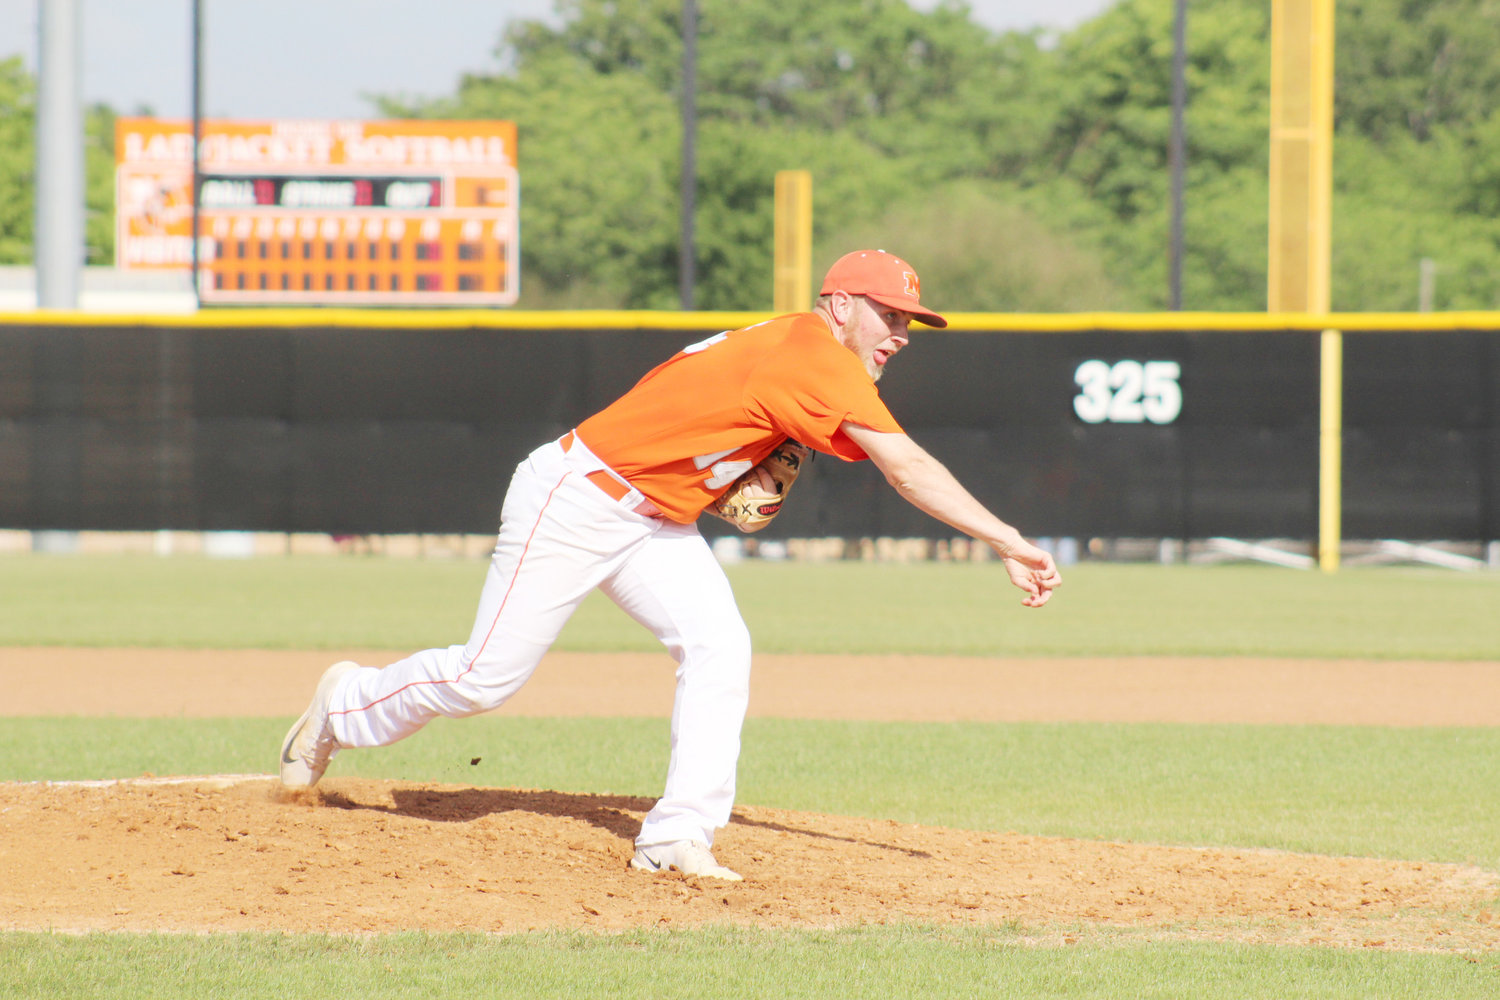 Mineola’s Noah Sneed fires one to the plate in the Yellowjacket win over Eustace. (Monitor photo by Briana Harmon)